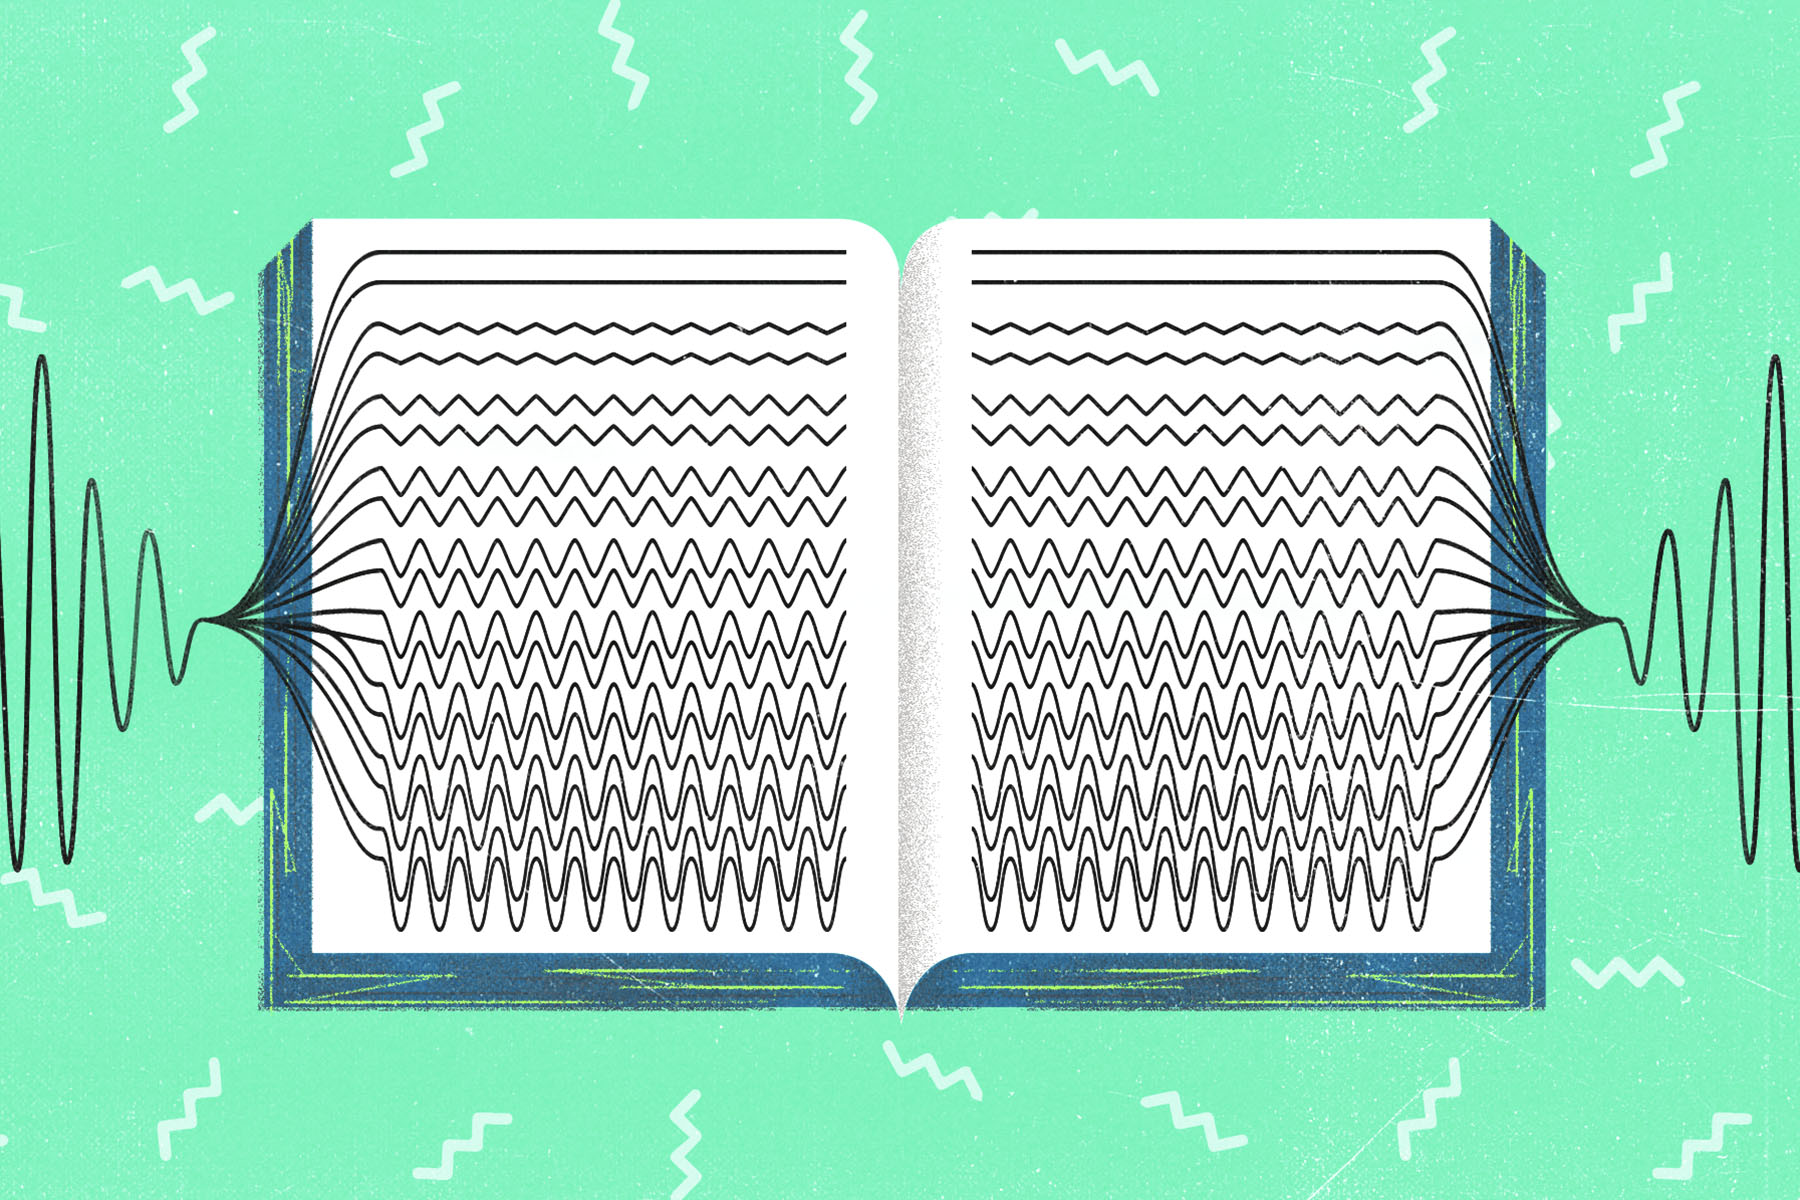 An illustration of a book with wavelengths drawn on its pages against a green background with white squiggles